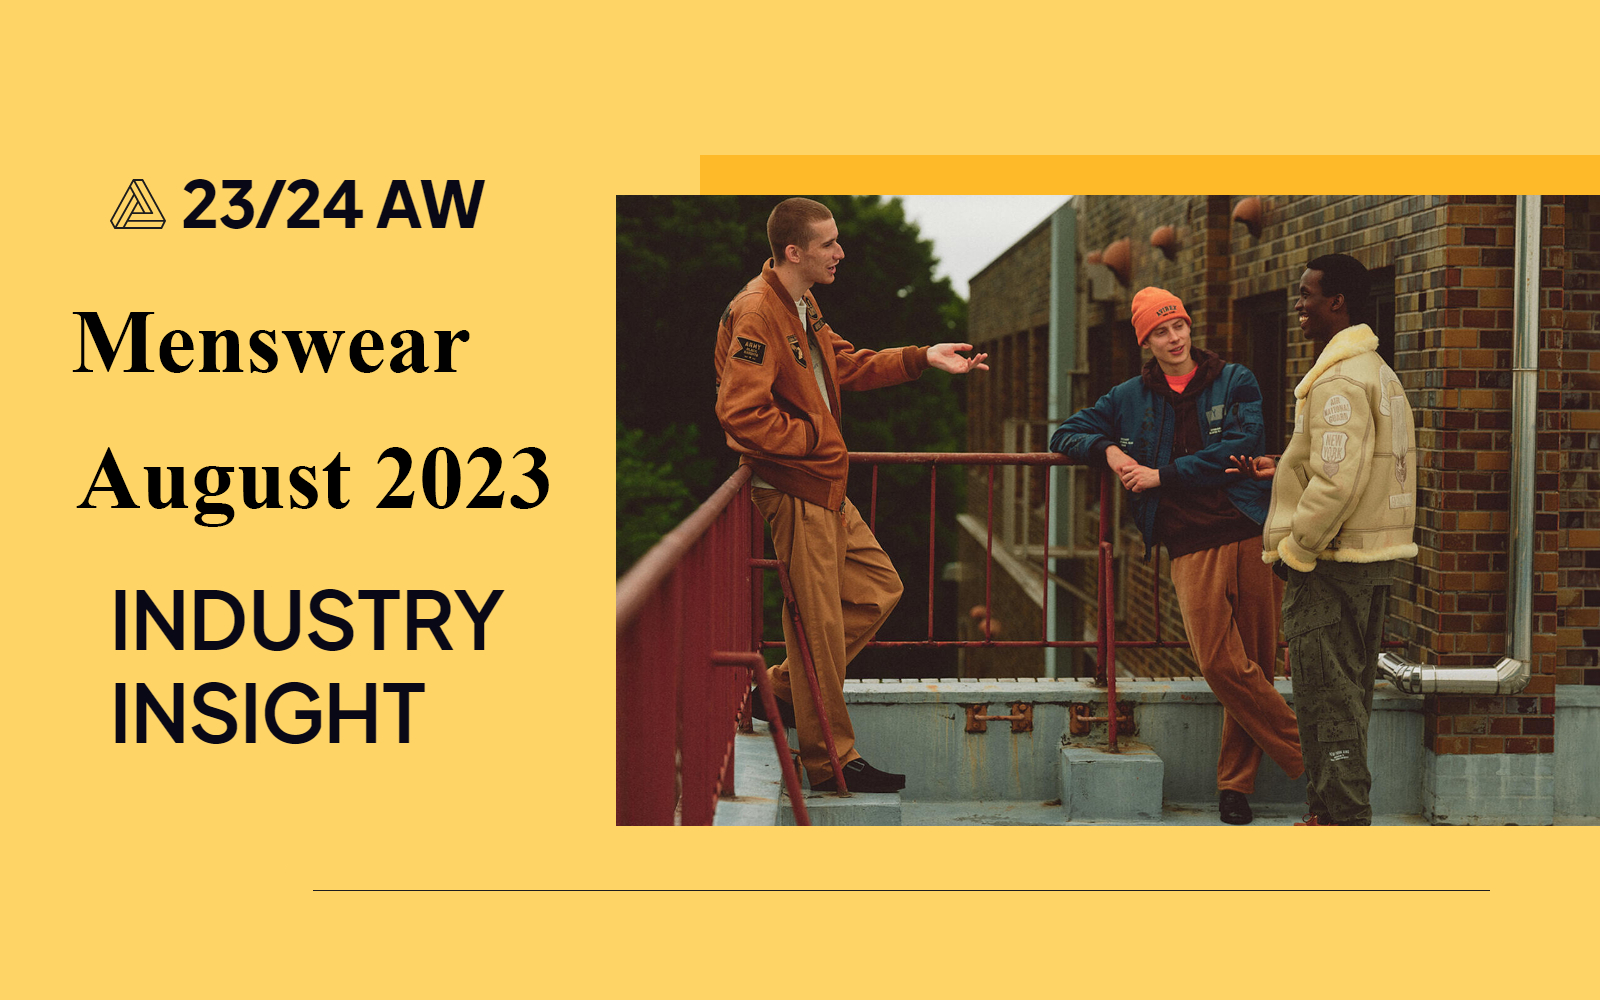 August 2023 -- The Industry Insight of Menswear